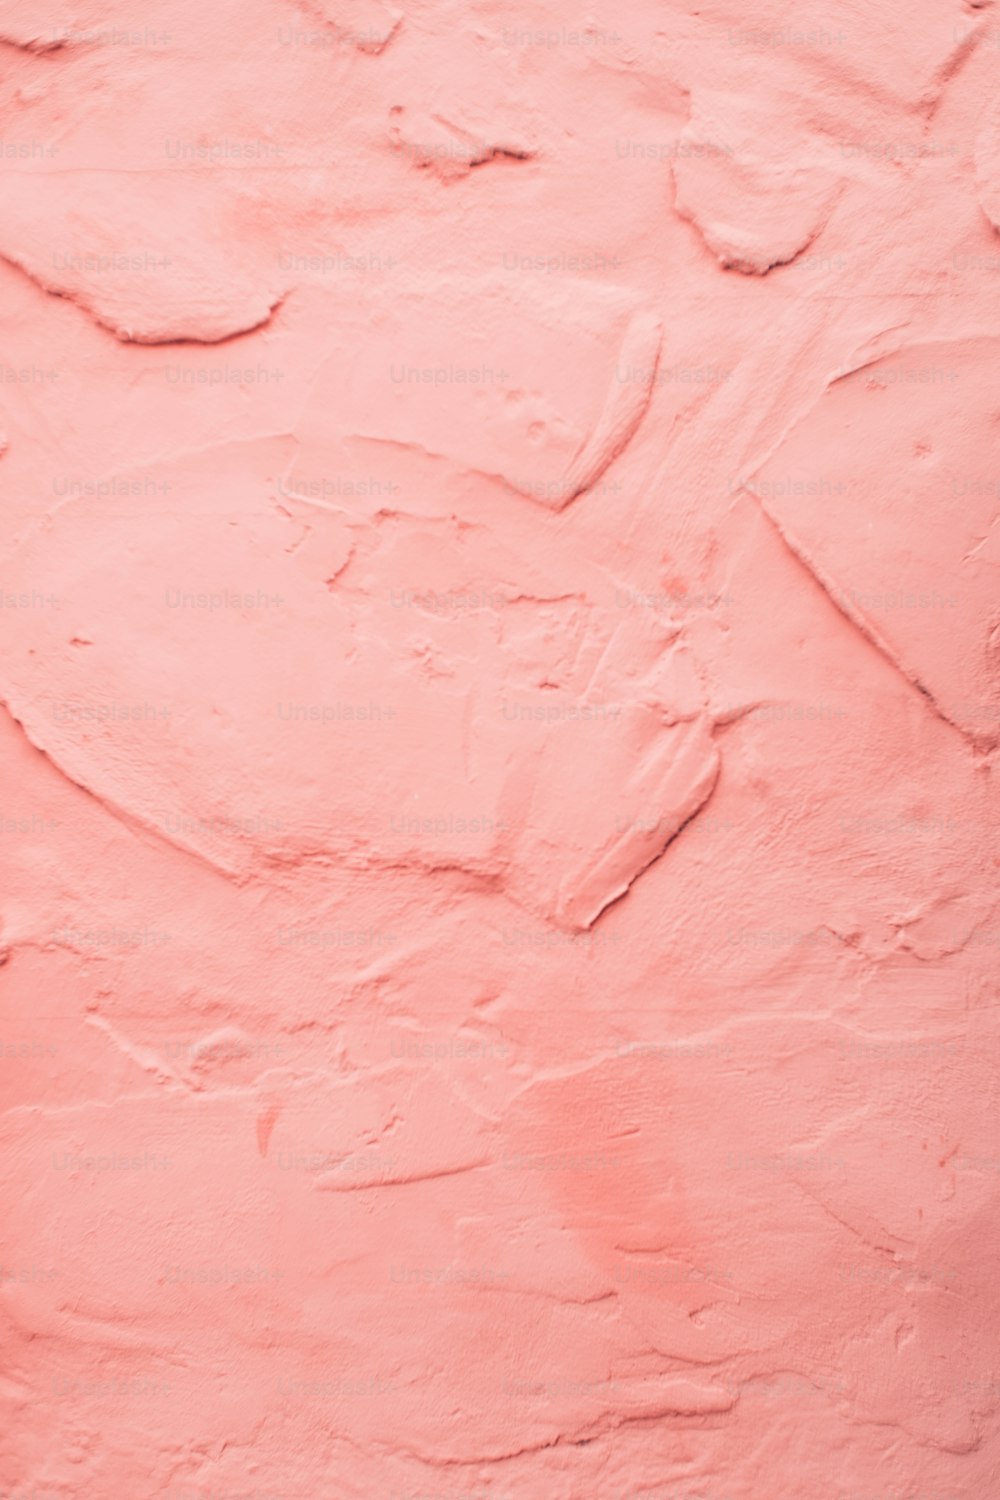 a pink wall with a heart painted on it